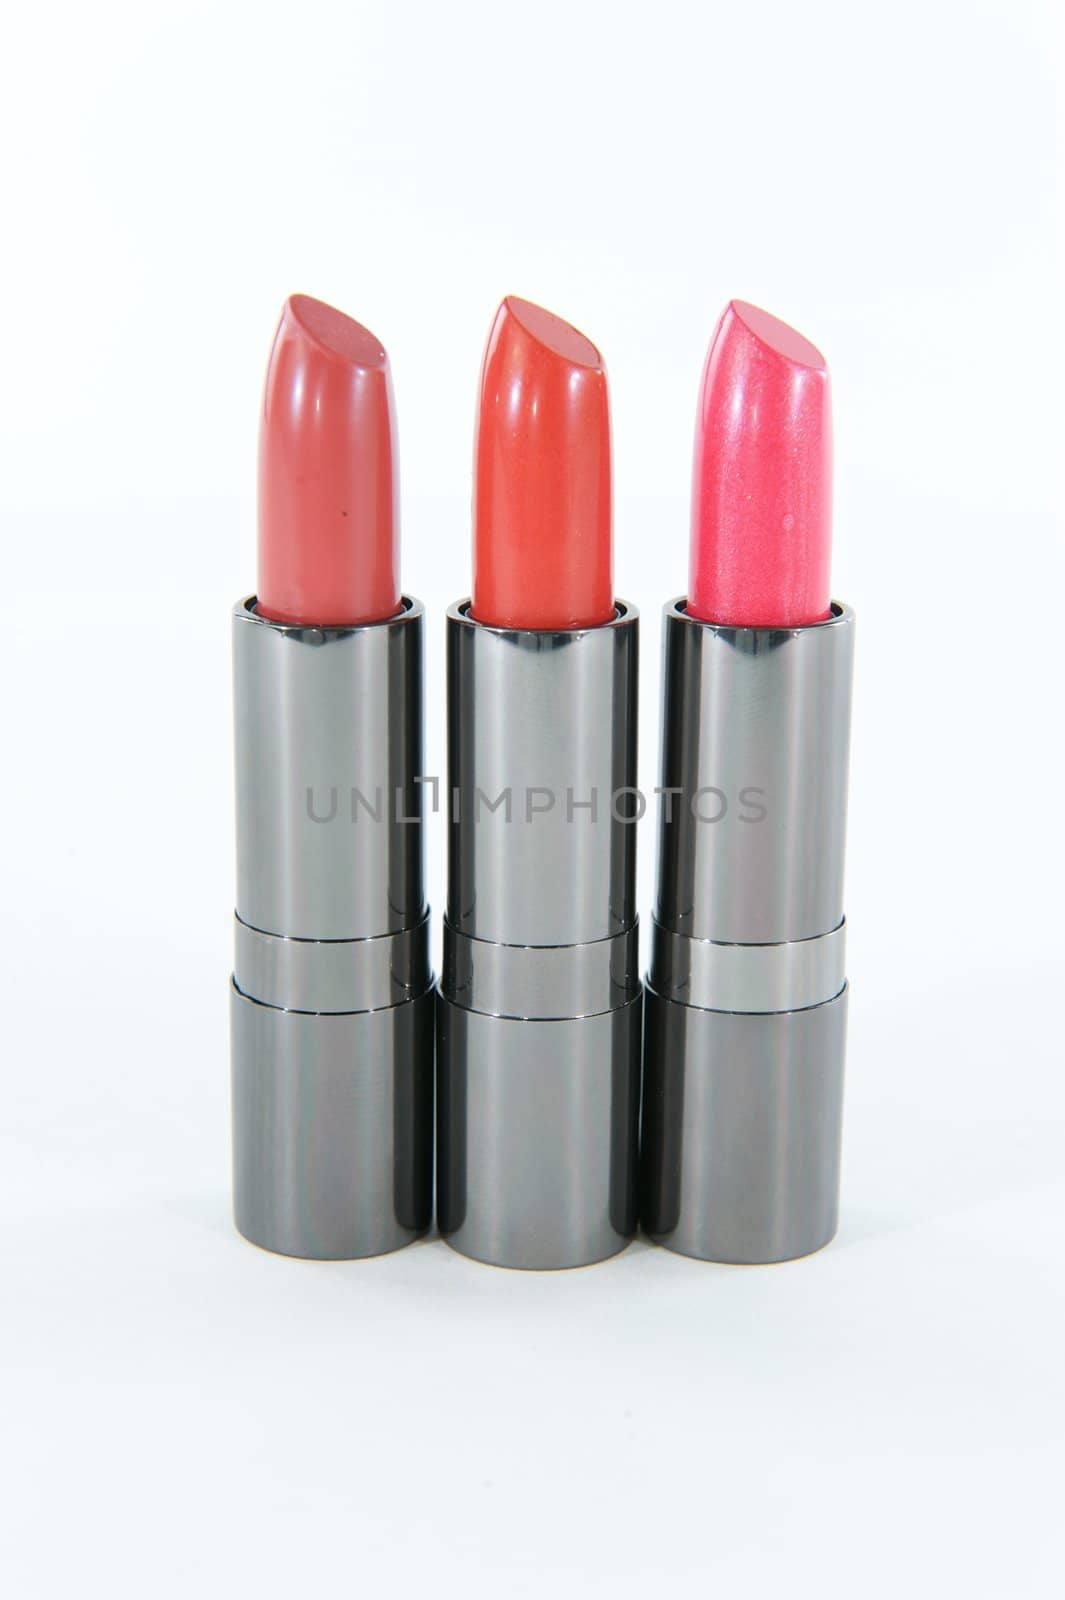 Three lipstick cases standing in a row on a white or blank background